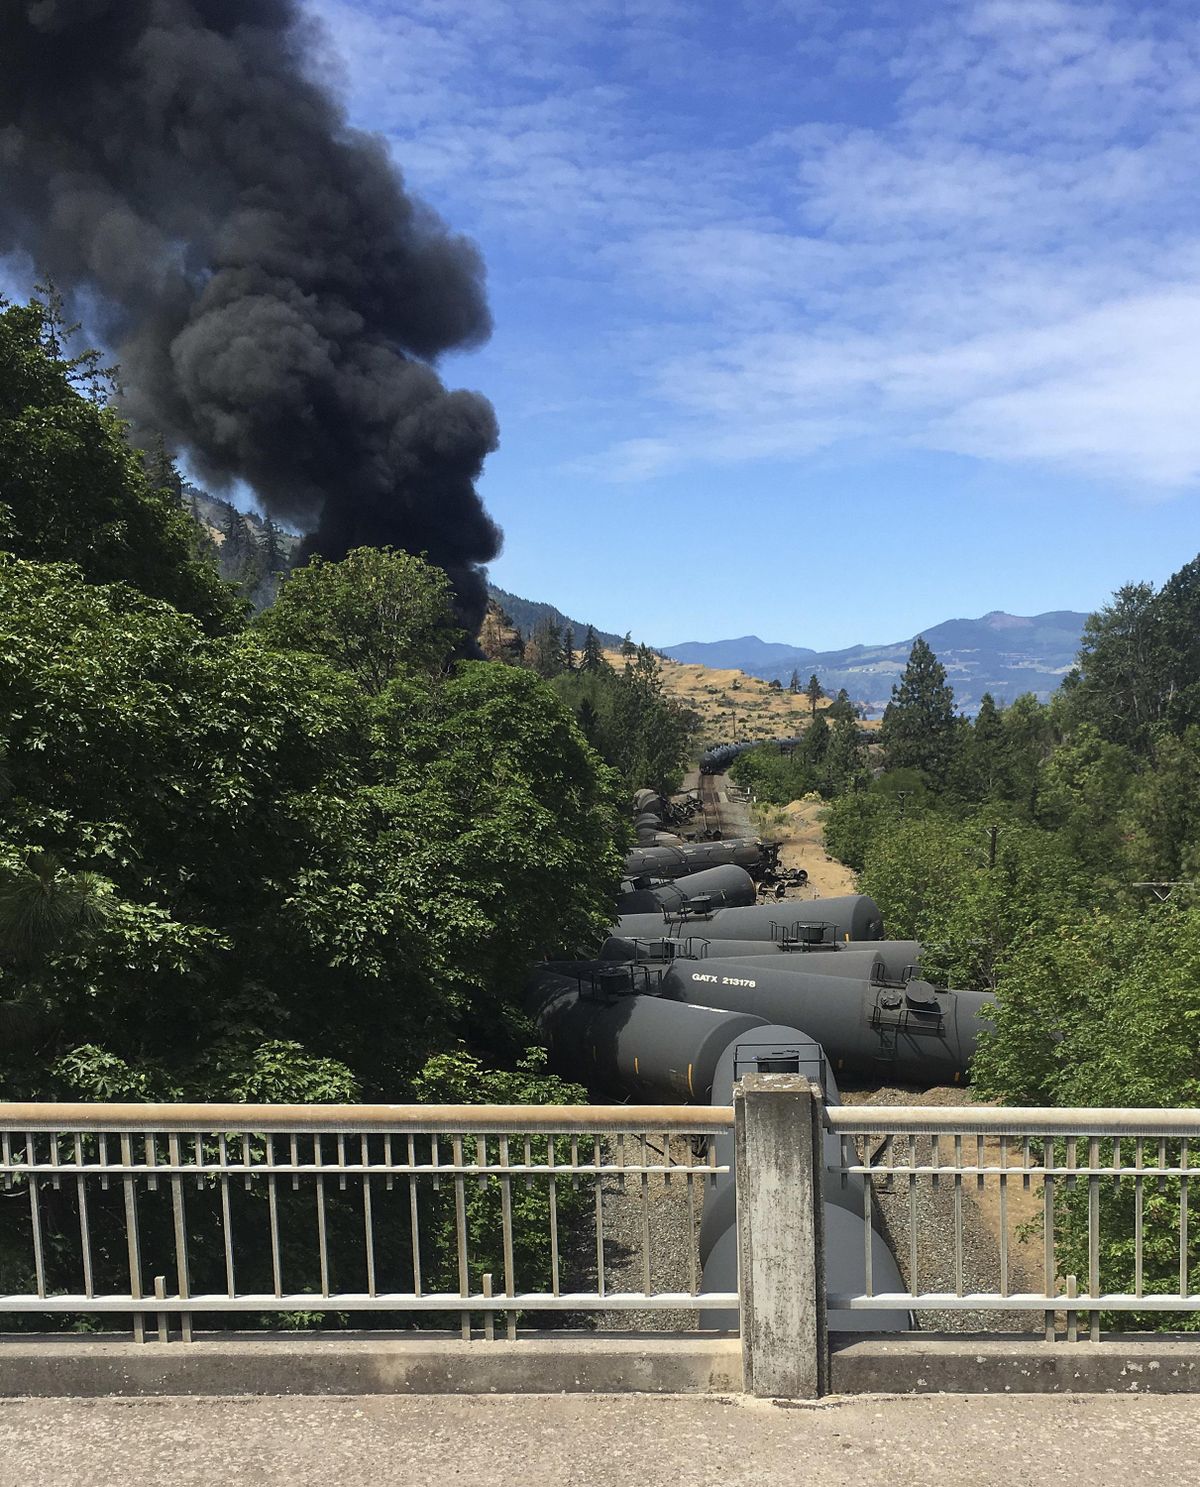 Tank cars, carrying oil, are derailed Friday, June 3, 2016, near Mosier, Ore. Federal investigation on Thursday said the Union Pacific Railroad was responsible for the derailment having failed to maintain its tracks. (Silas Bleakley / Associated Press)